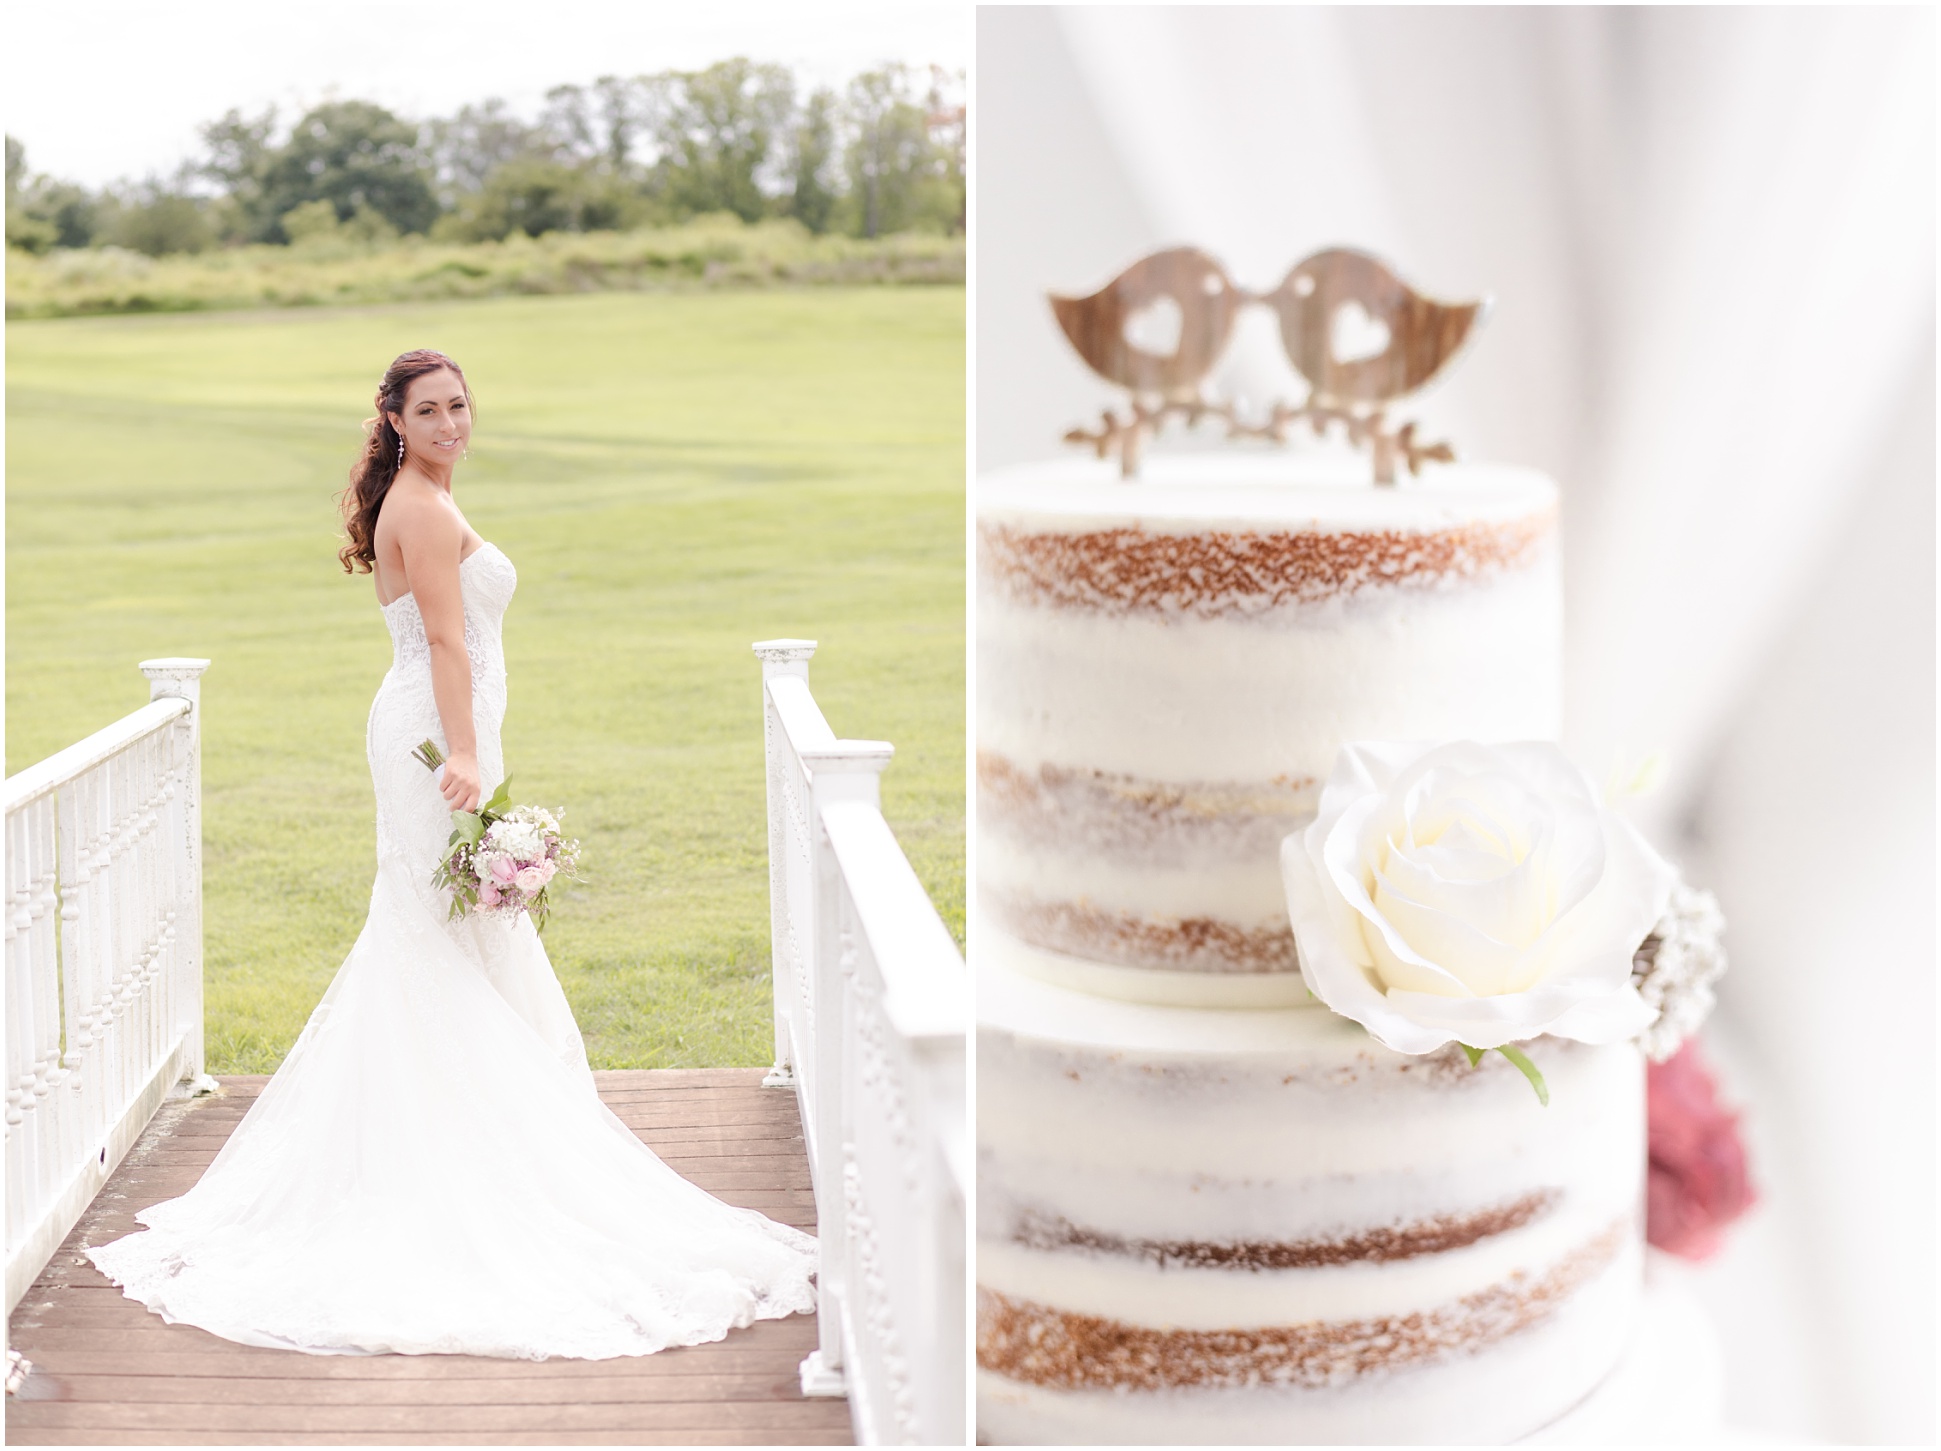 Left: Bridal Portrait of Brooke on the bridge, Right: Close up of the cake